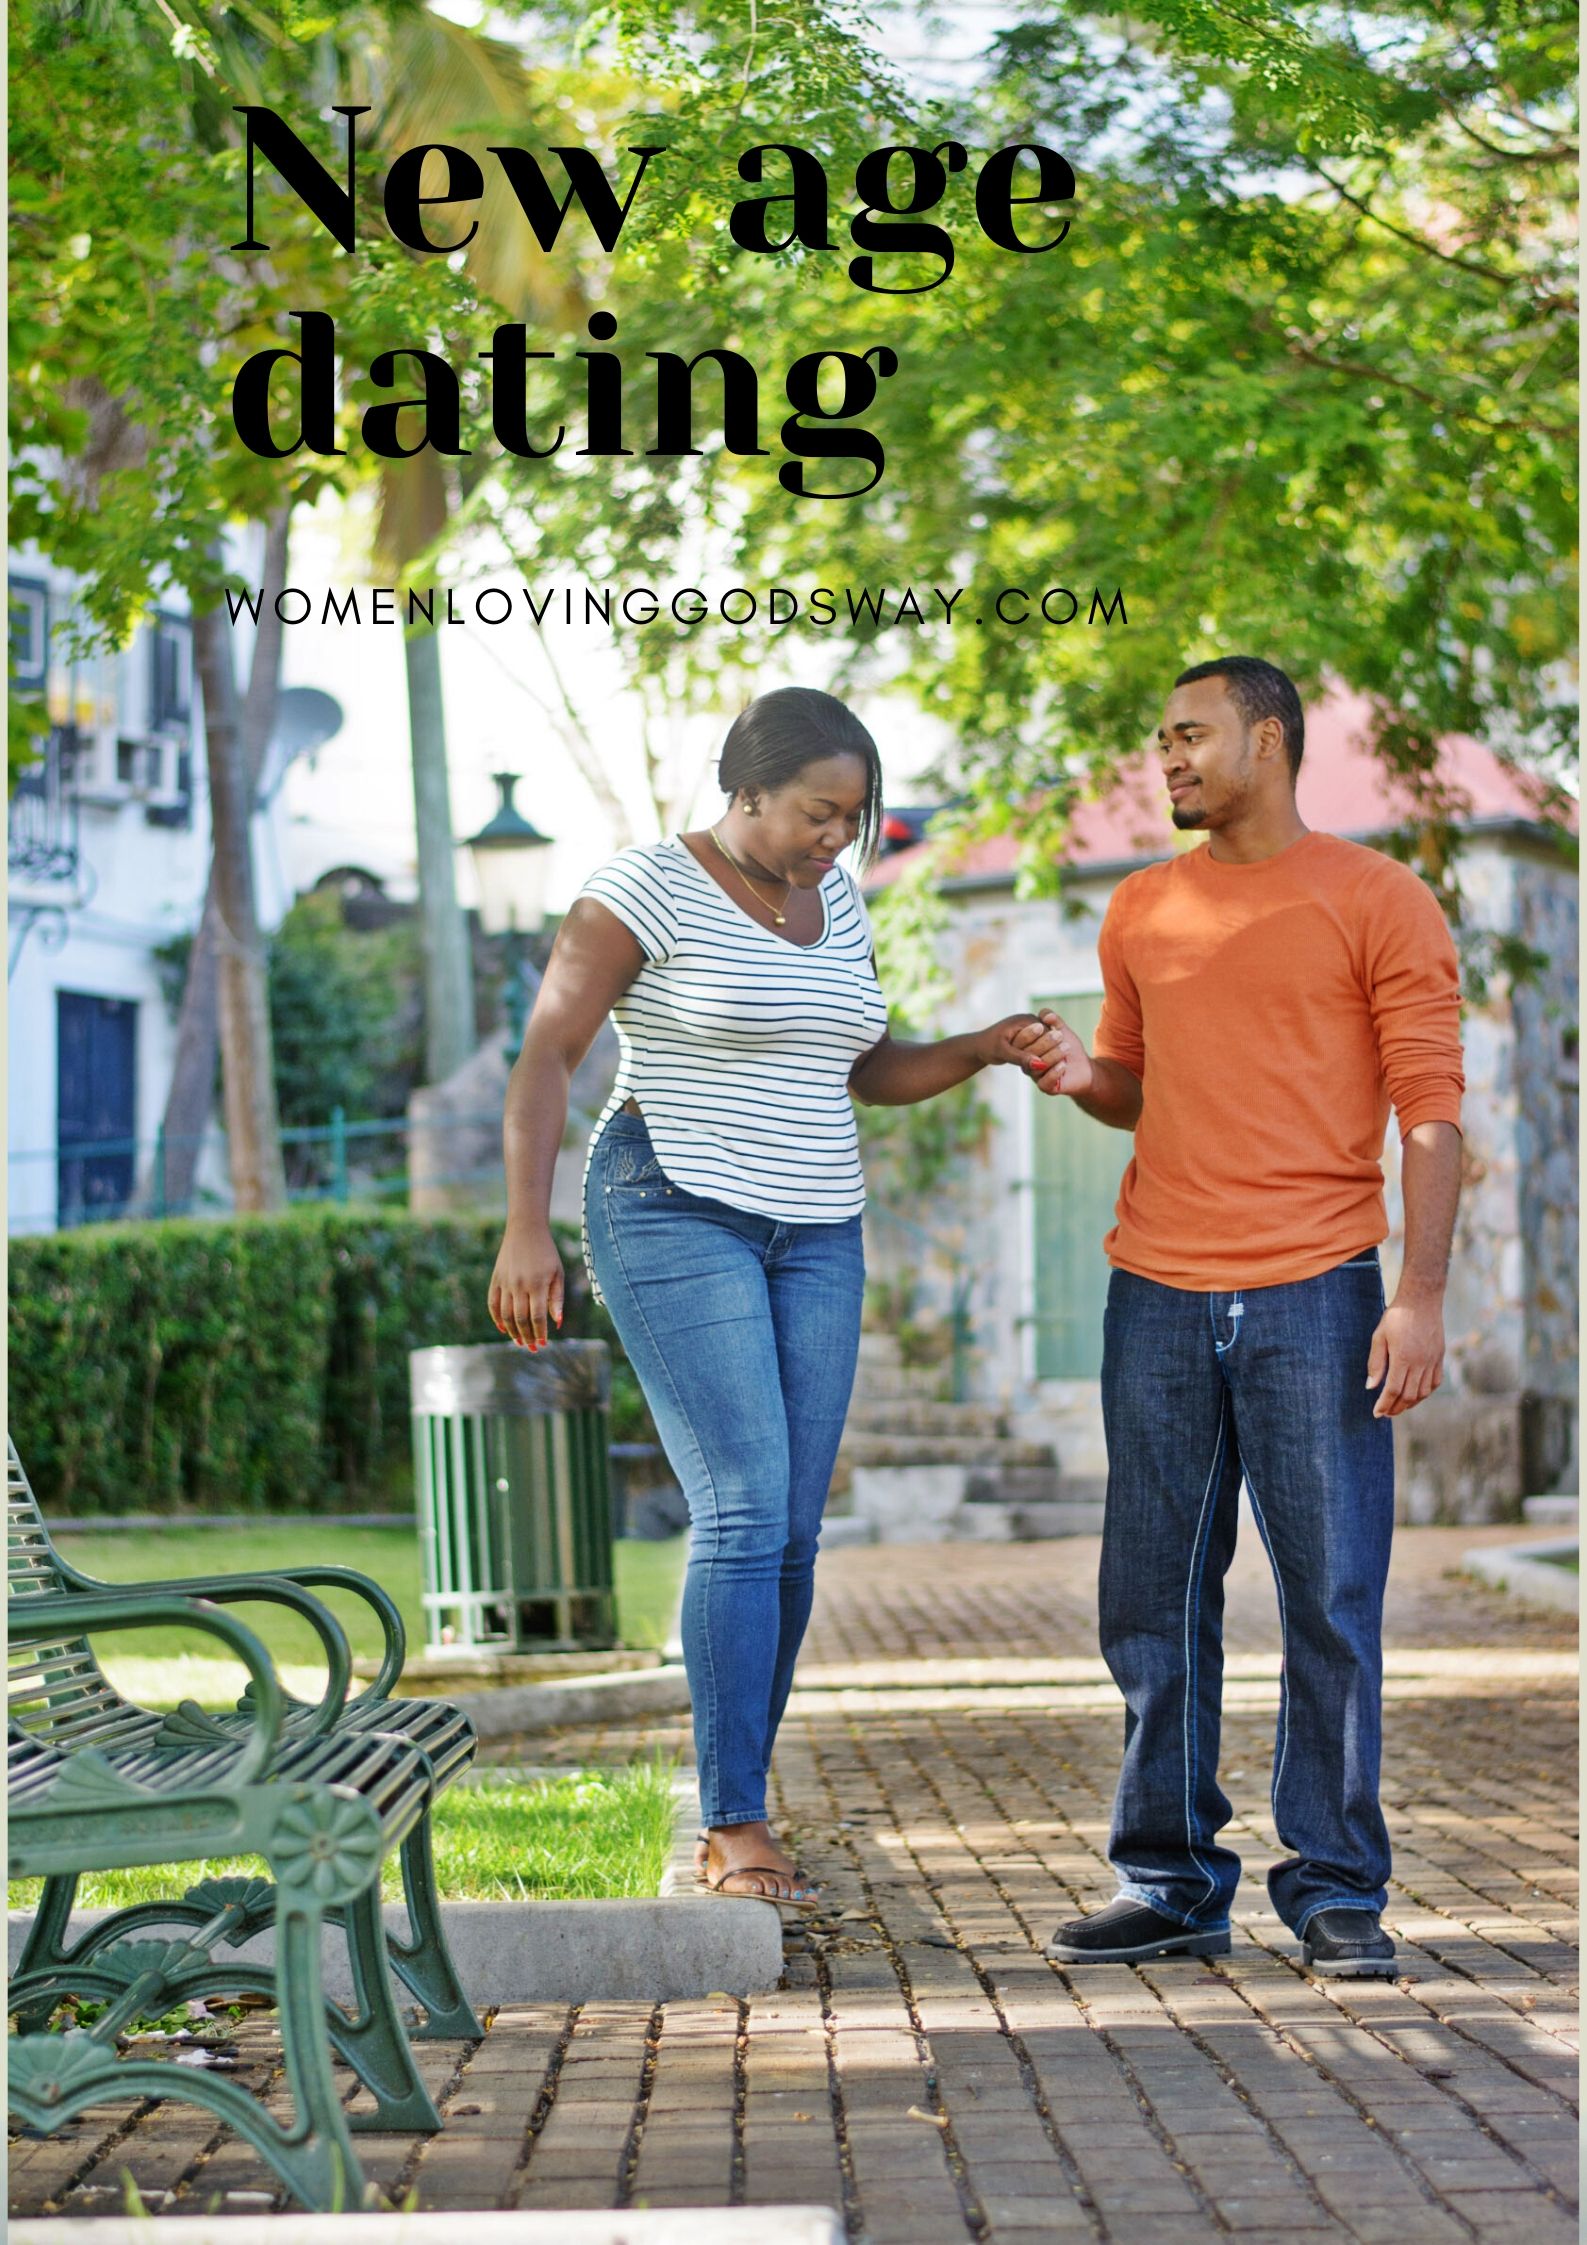 New age dating sites